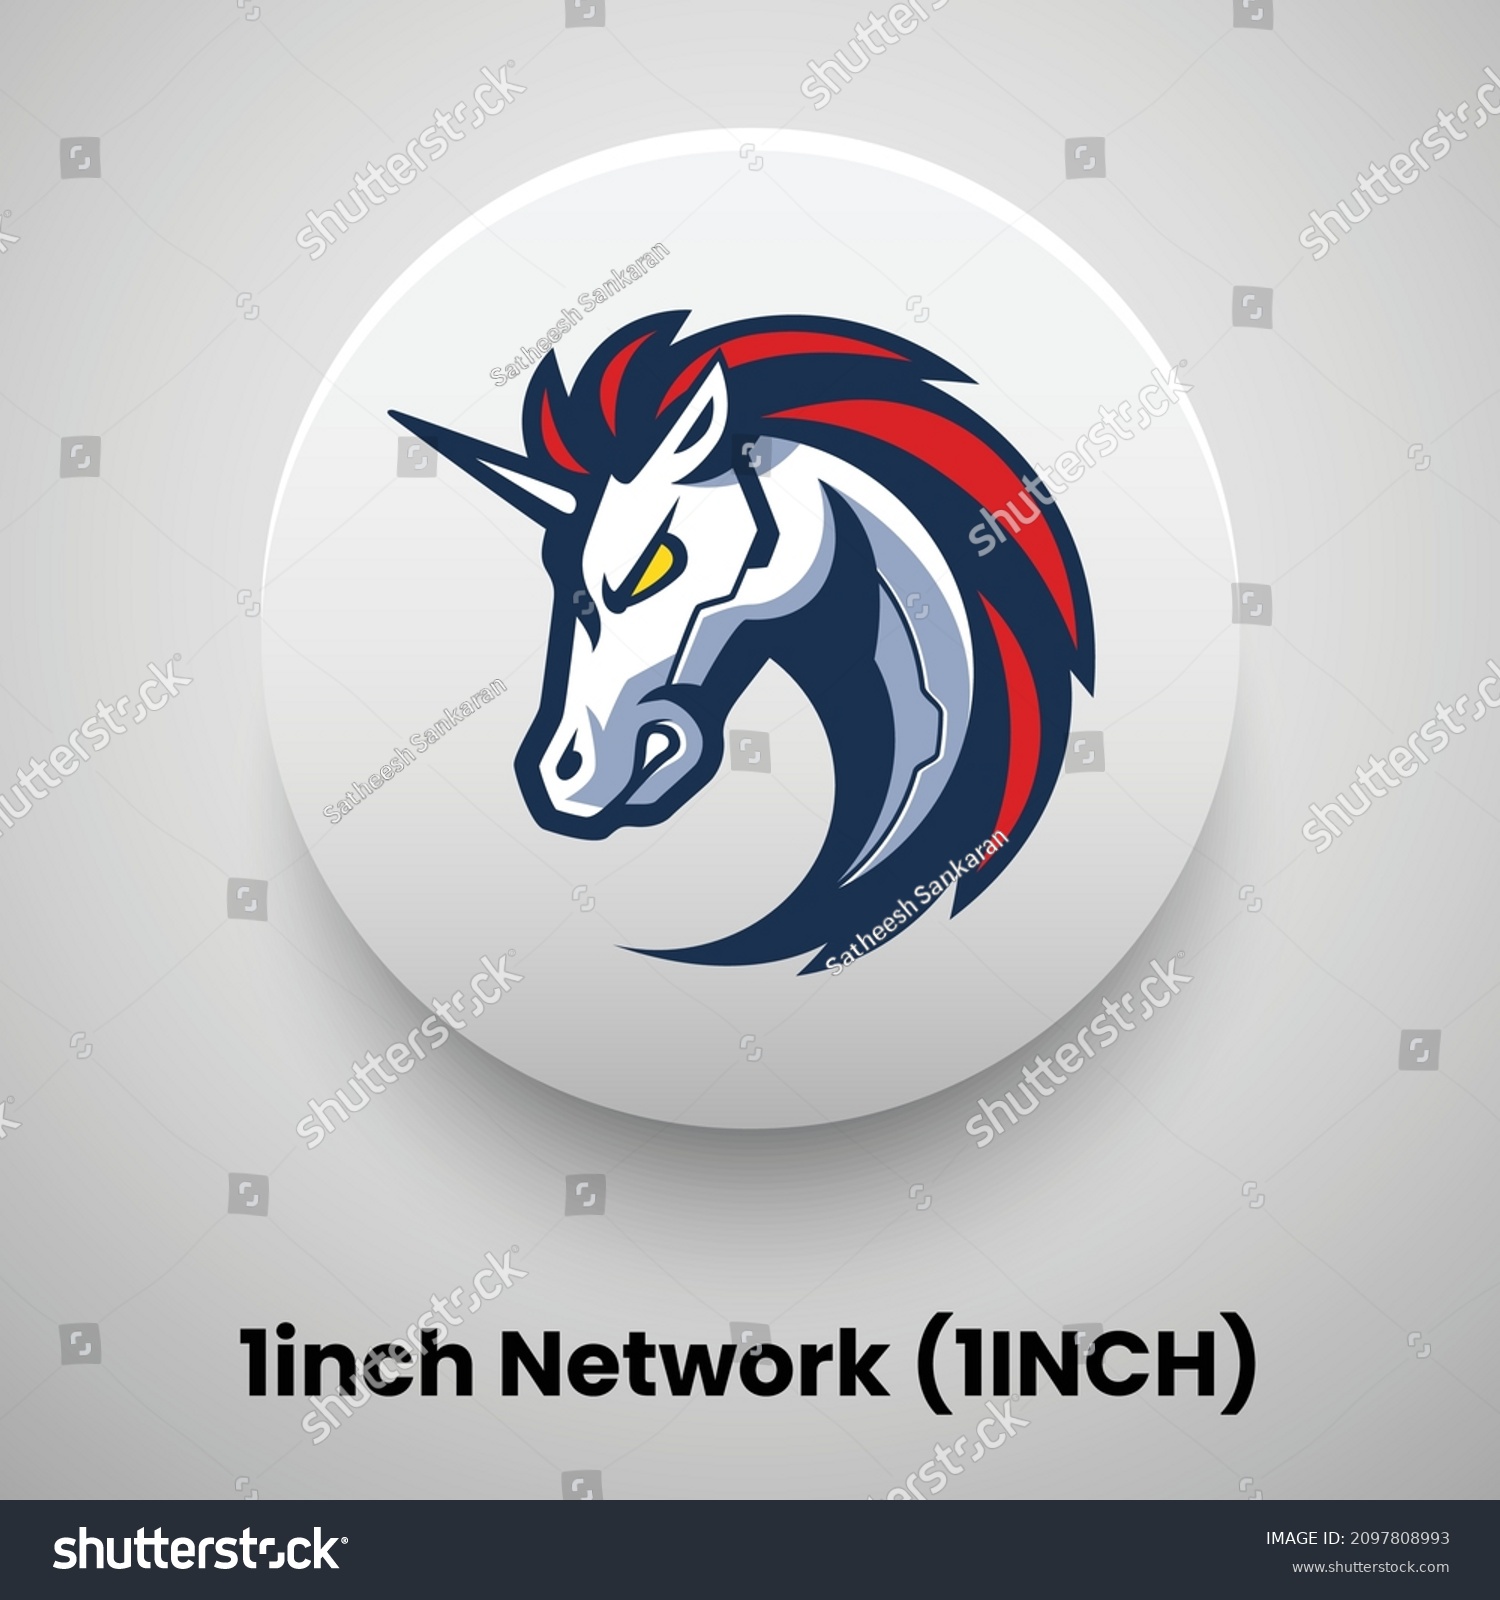 SVG of Creative block chain based crypto currency 1inch Network (1INCH) logo vector illustration design. Can be used as currency icon, badge, label, symbol, sticker and print background template svg